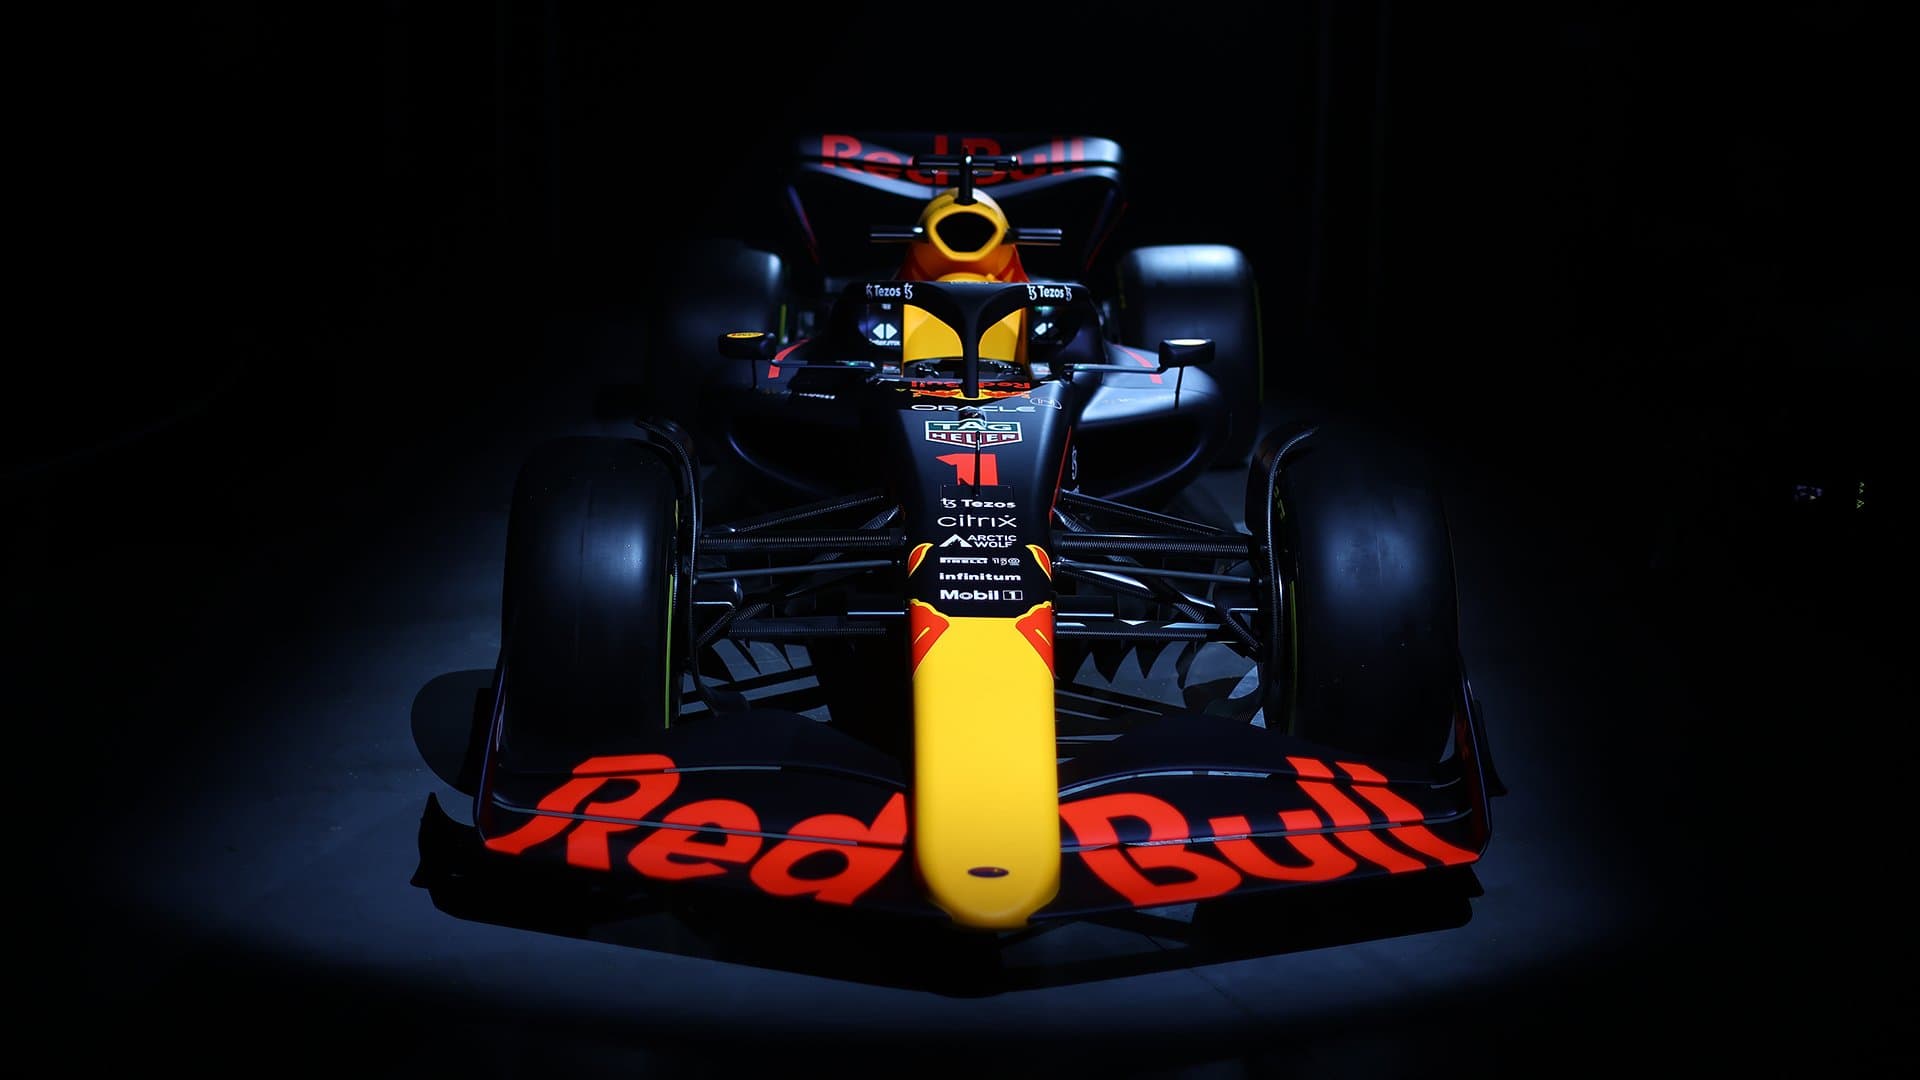 This is what the Red Bull F1 car will look like in 2023